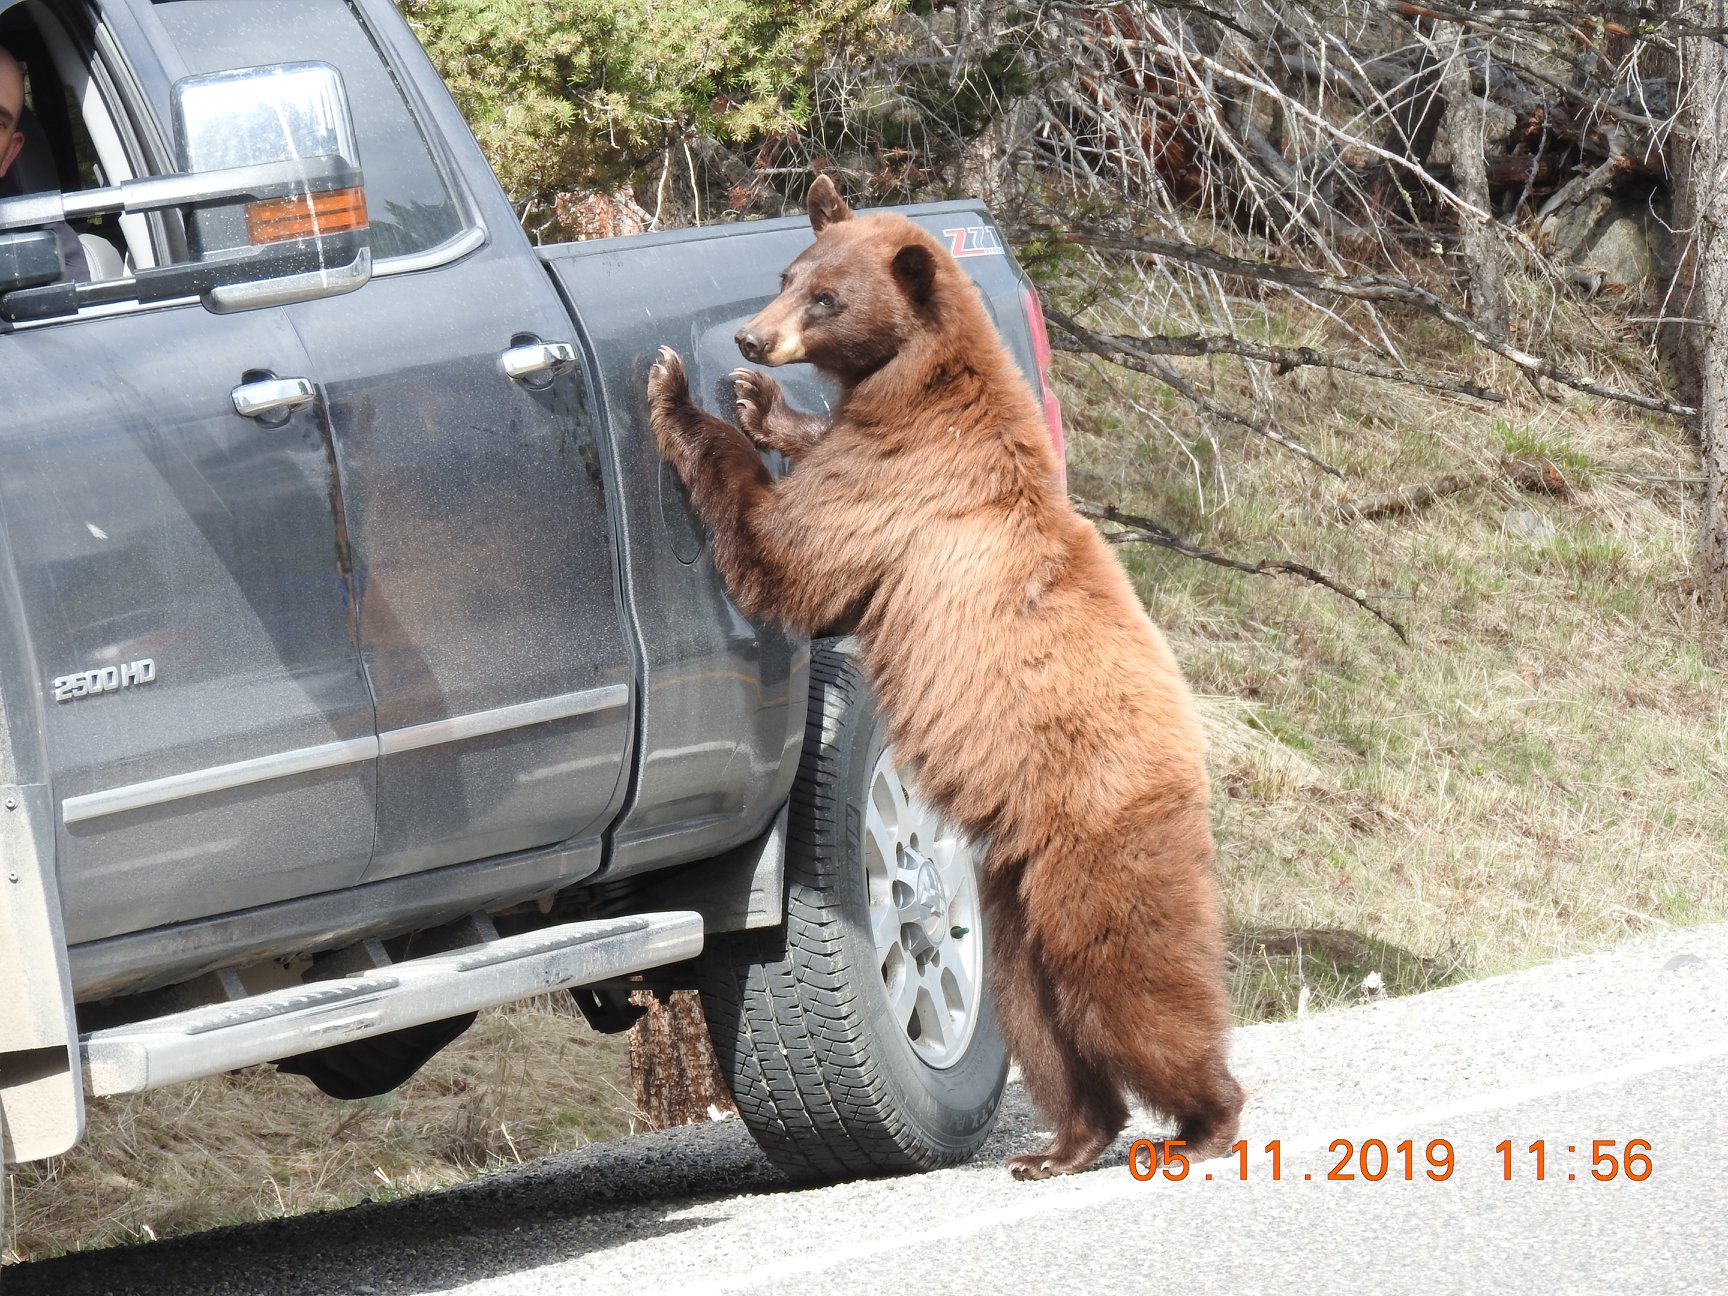 Black bear with front feet on vehicle